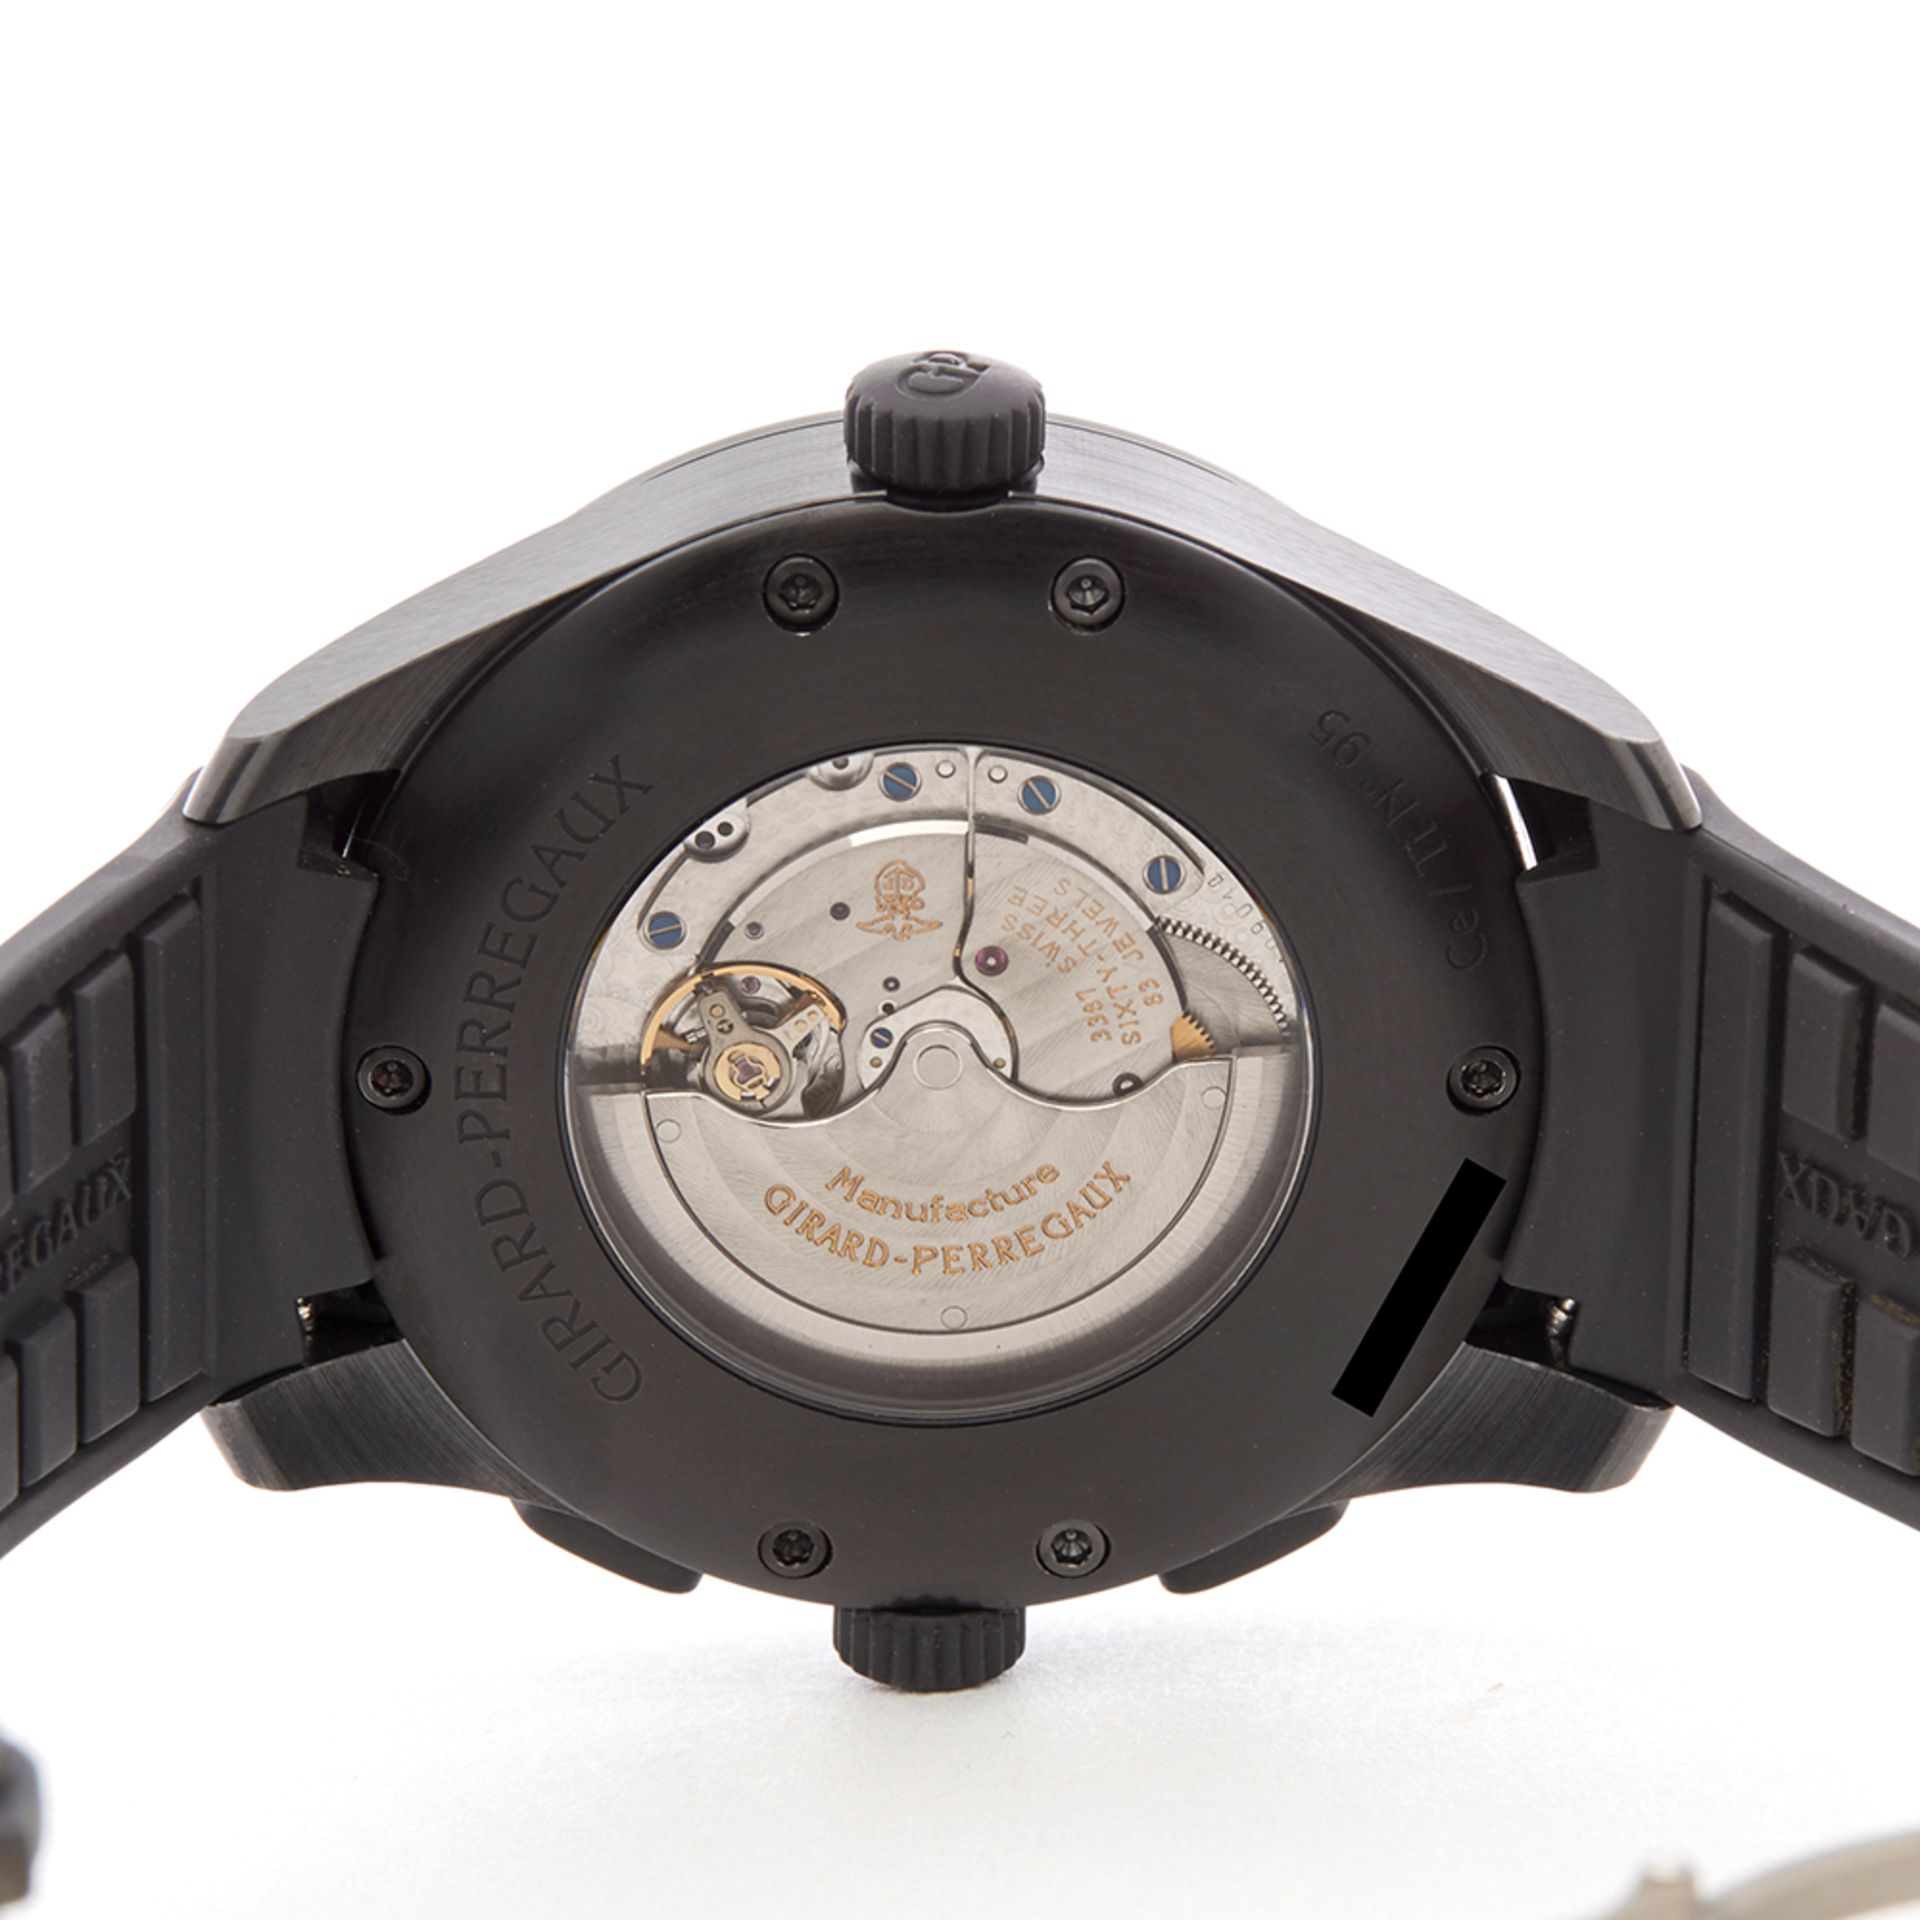 Girard Perregaux WW.TC Shadow Flyback Chronograph 43mm Black DLC Coated Stainless Steel - Image 7 of 7